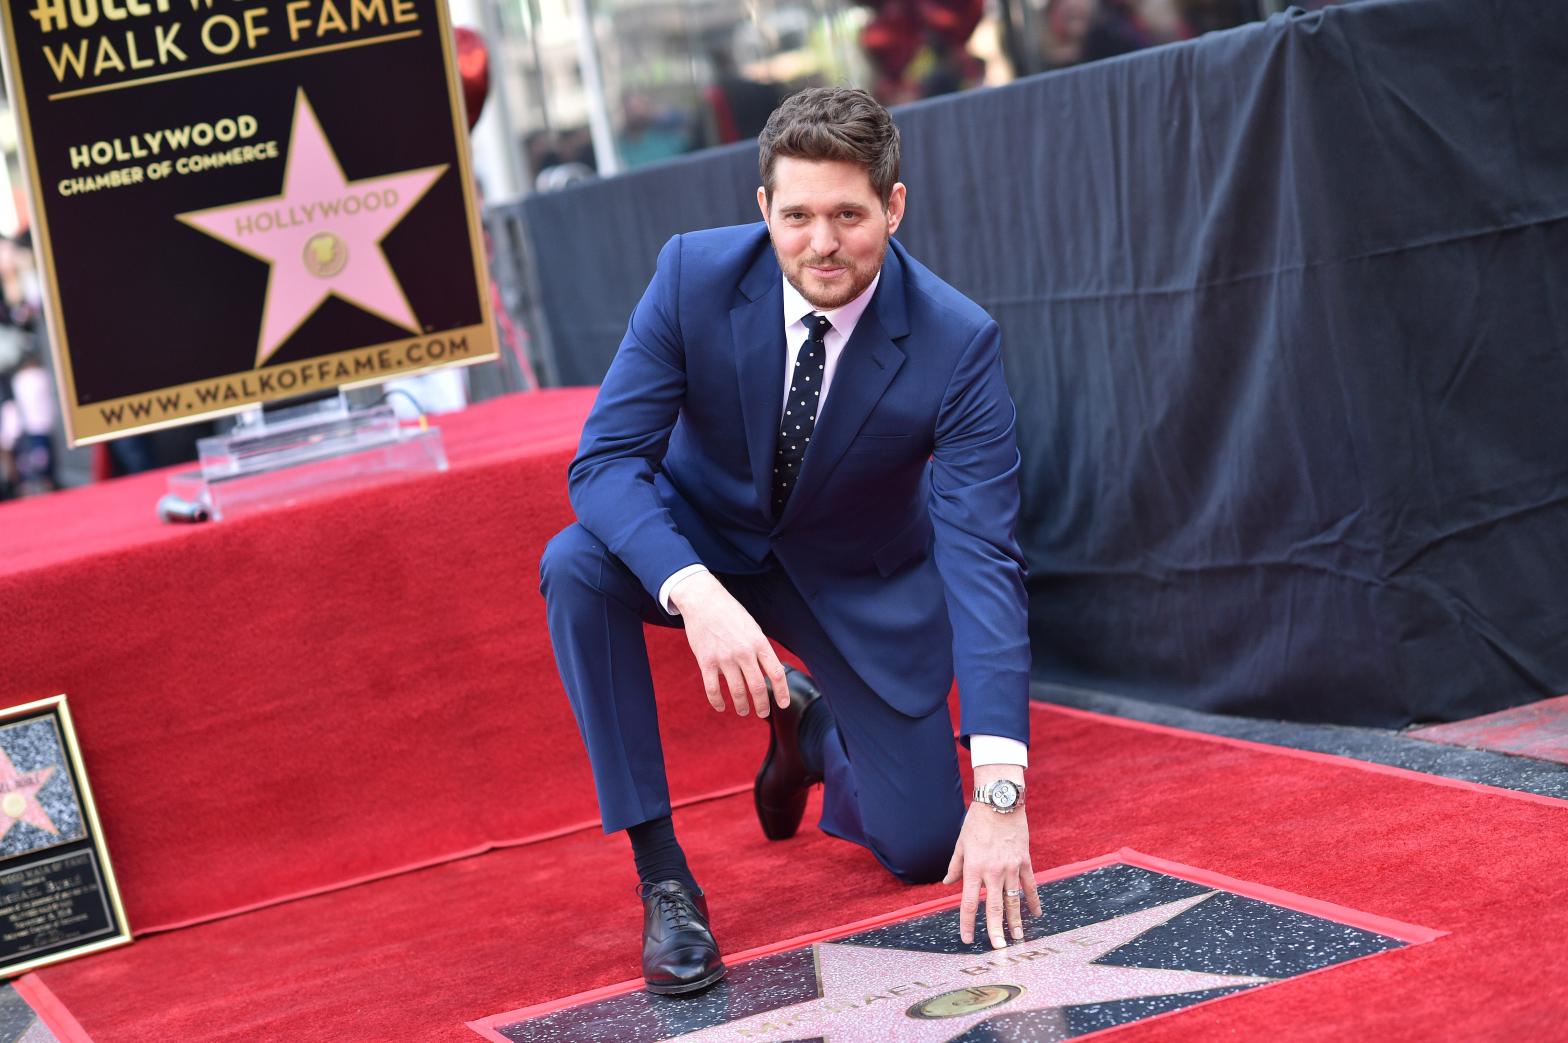 Michael Buble Honoured With Star on Hollywood Walk of Fame